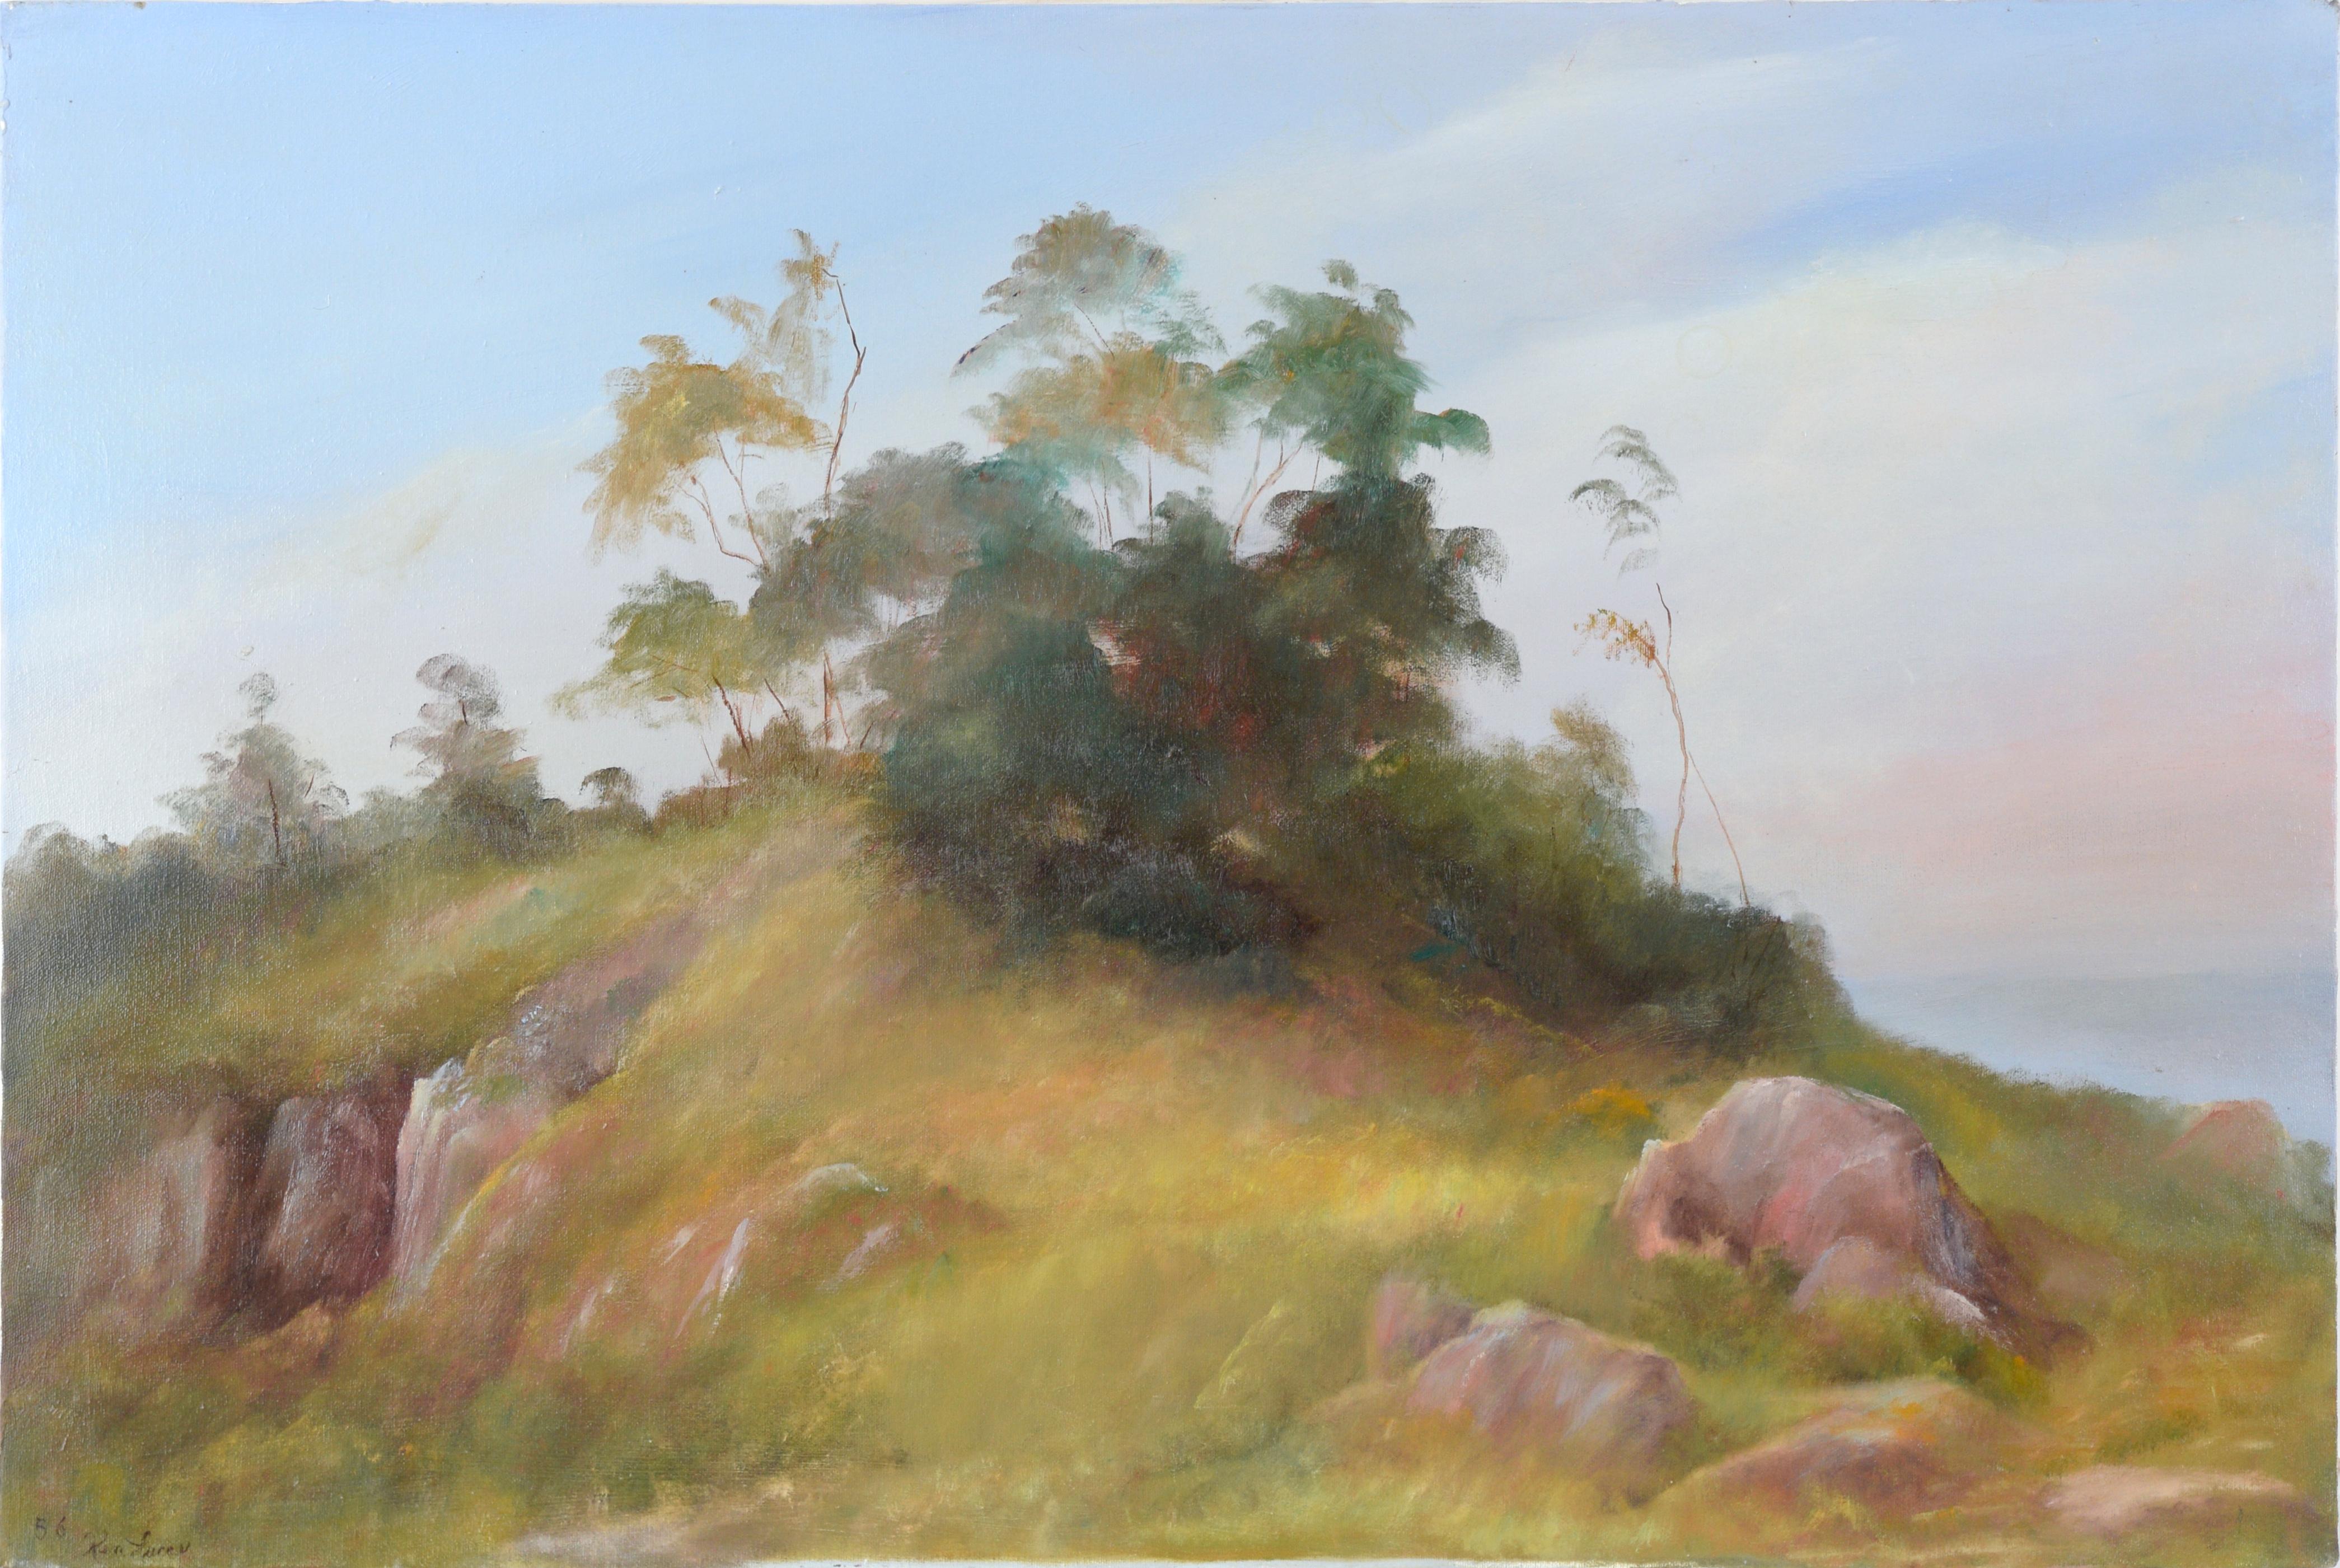 Kenneth Lucas Landscape Painting - Trees at the Top of the Hill - California Coastal Landscape in Oil on Canvas